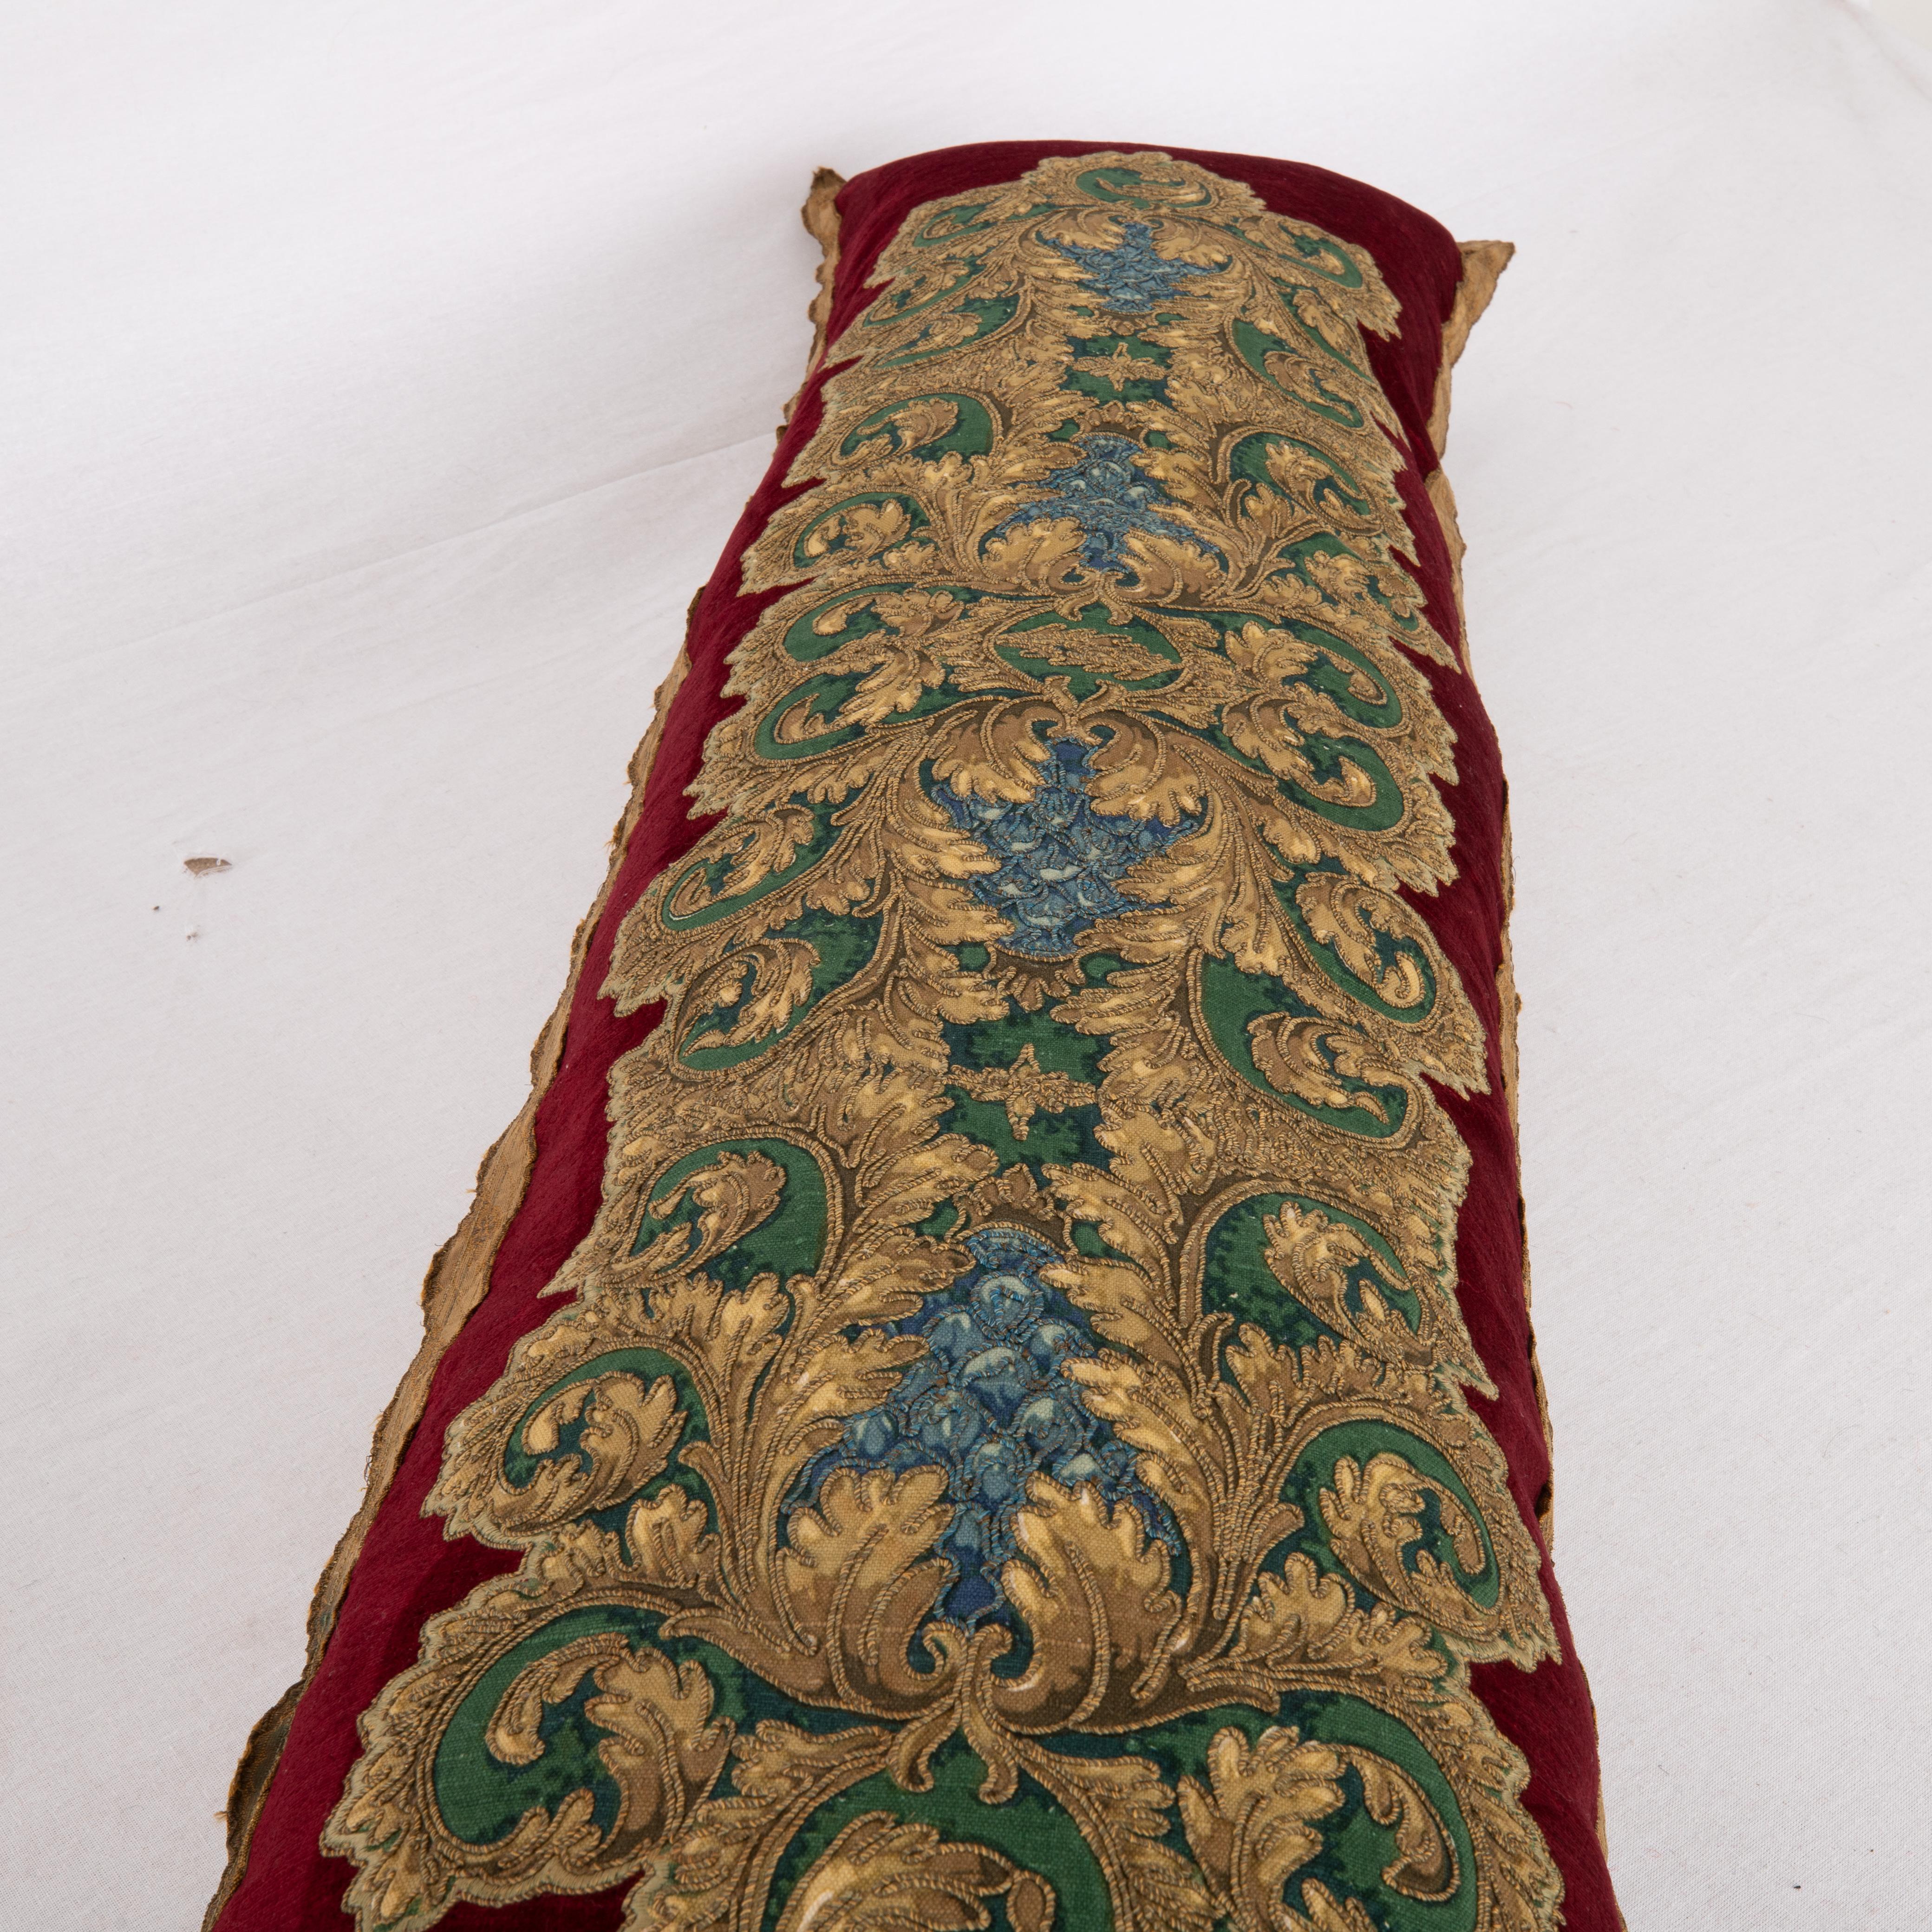 Pillow Cover Made from an early 20th C. Italian Embroidery For Sale 1